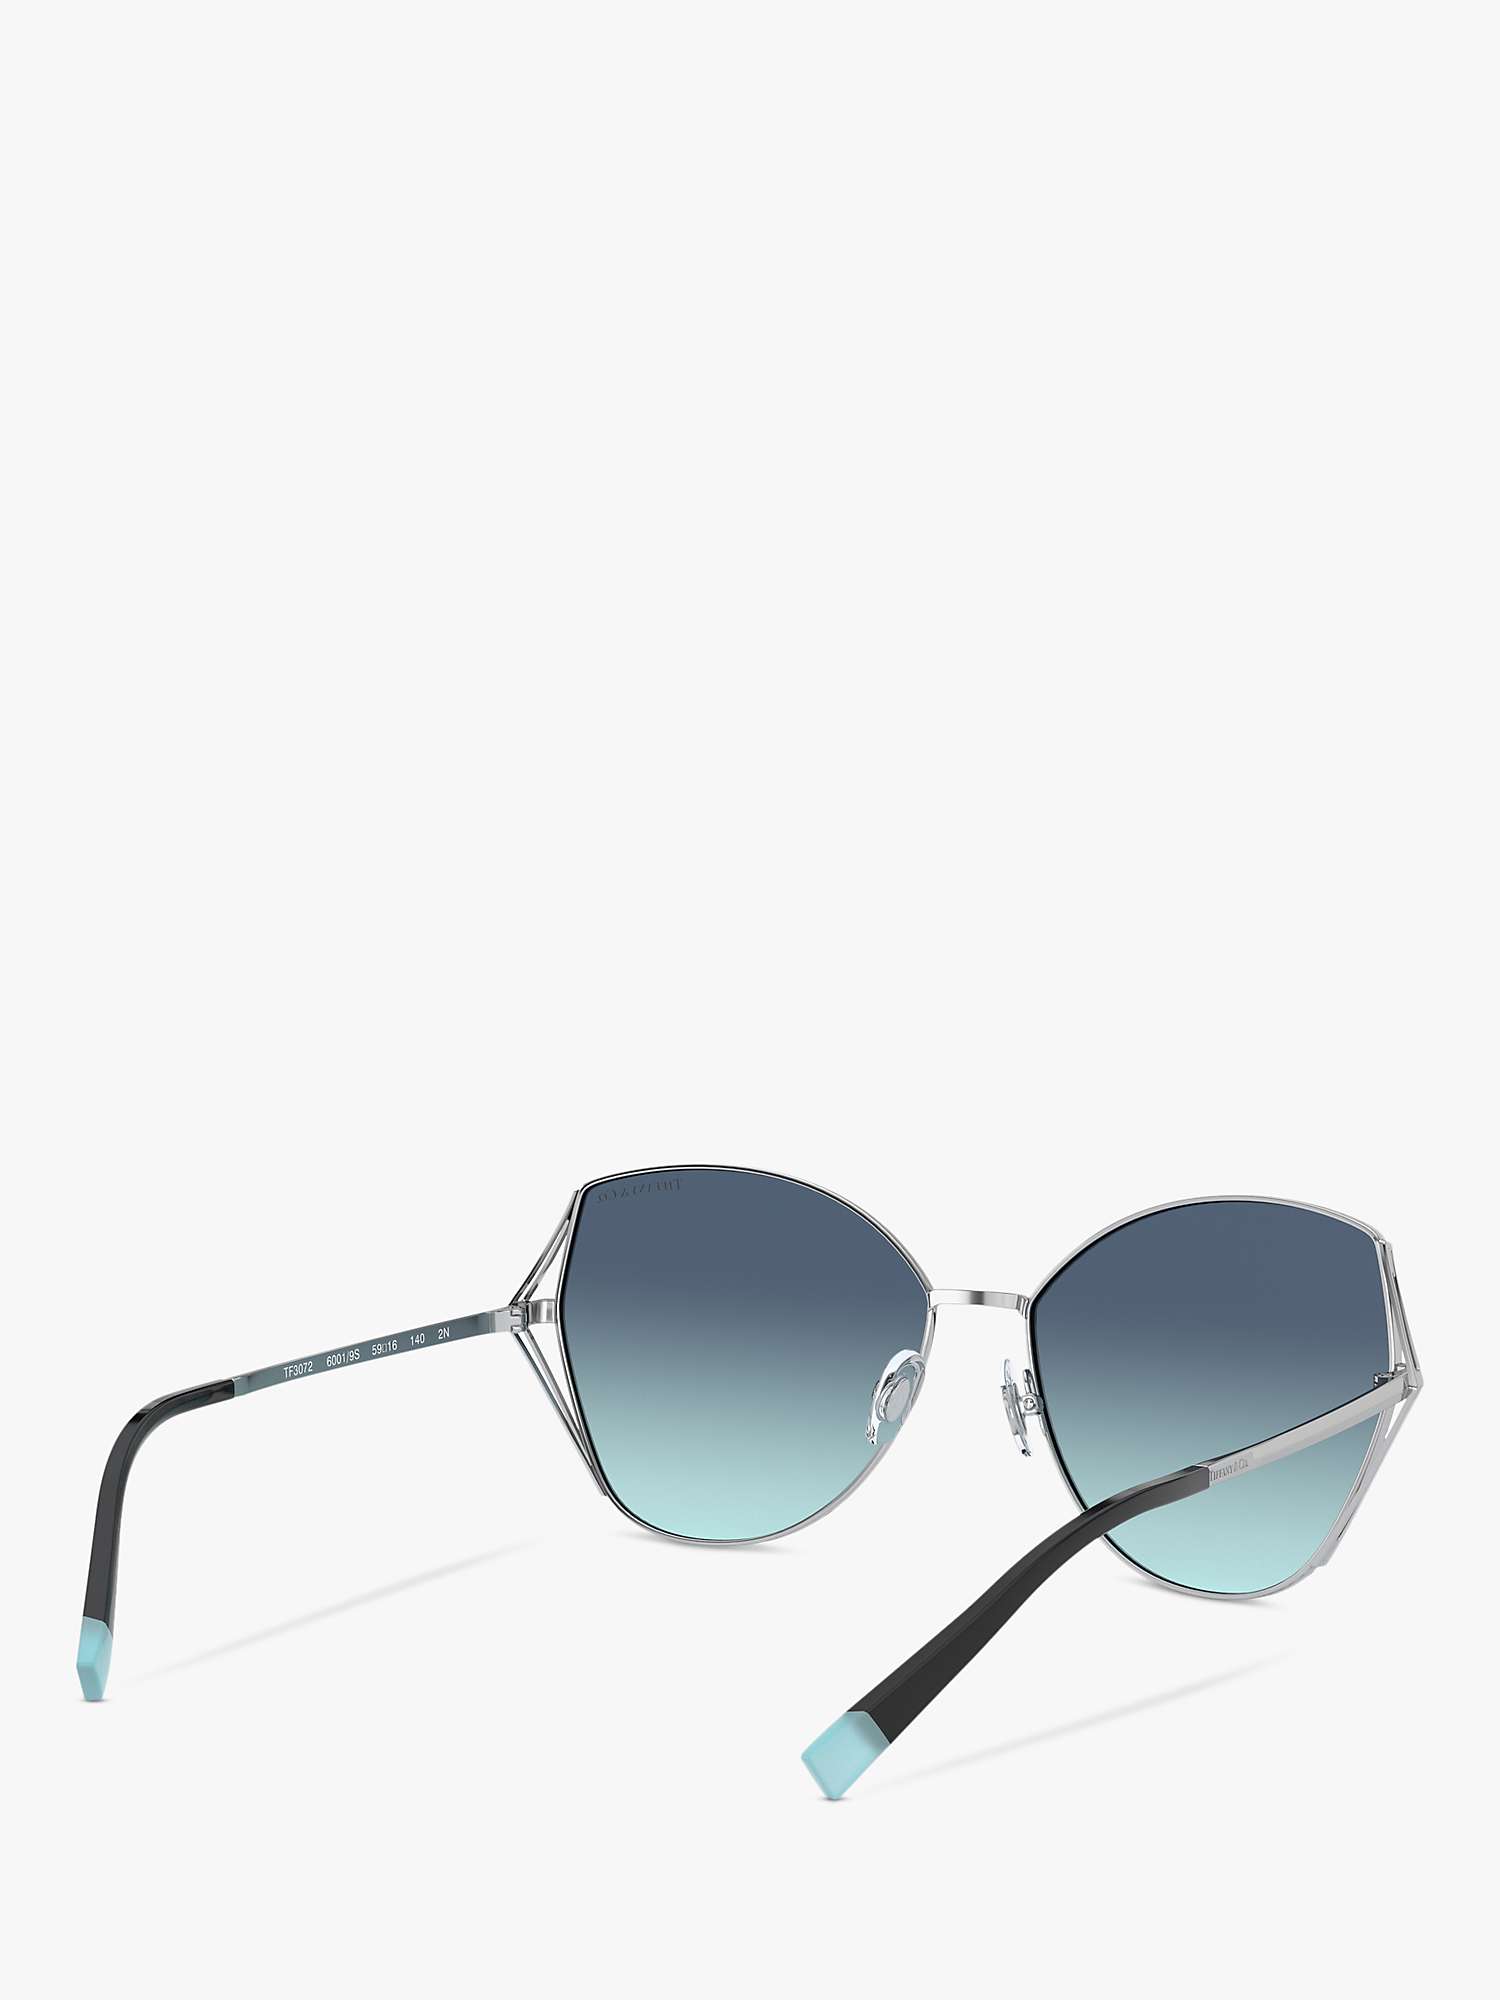 Buy Tiffany & Co TF3072 Women's Butterfly Sunglasses, Silver/Blue Gradient Online at johnlewis.com